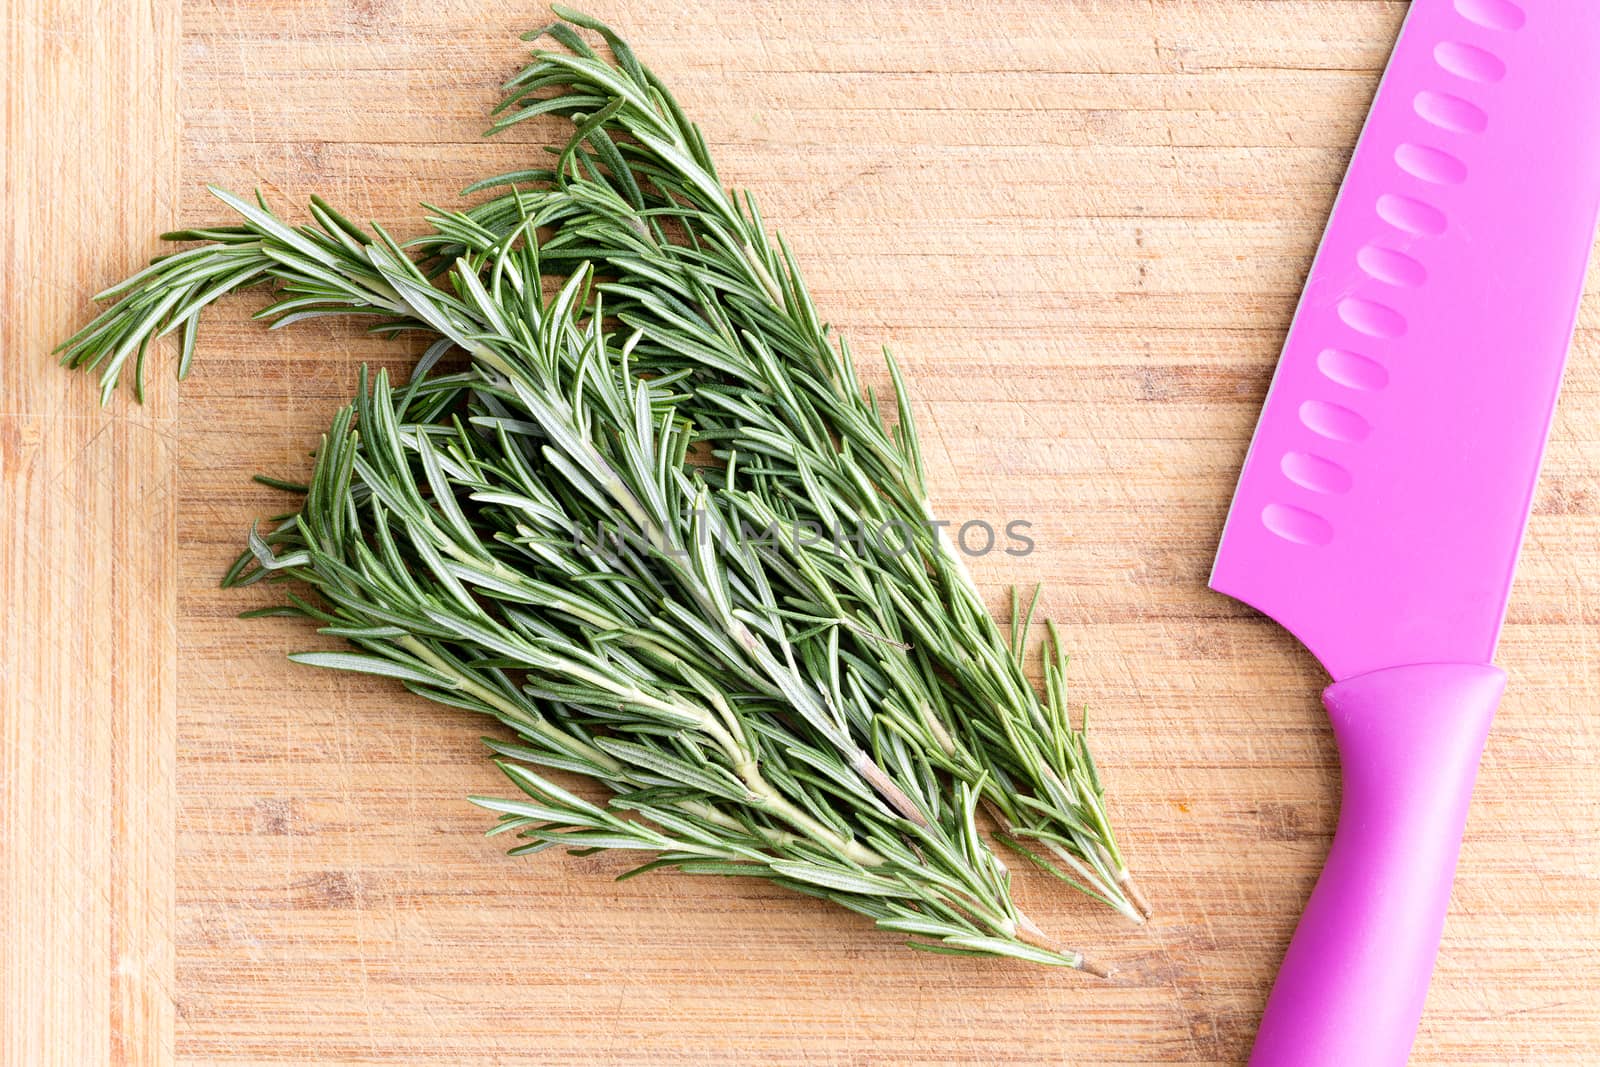 Bunch of aromatic fresh rosemary on a wooden chopping board with a colorful pink plastic knife ready to be chopped as an ingredient in savory cooking, overhead view